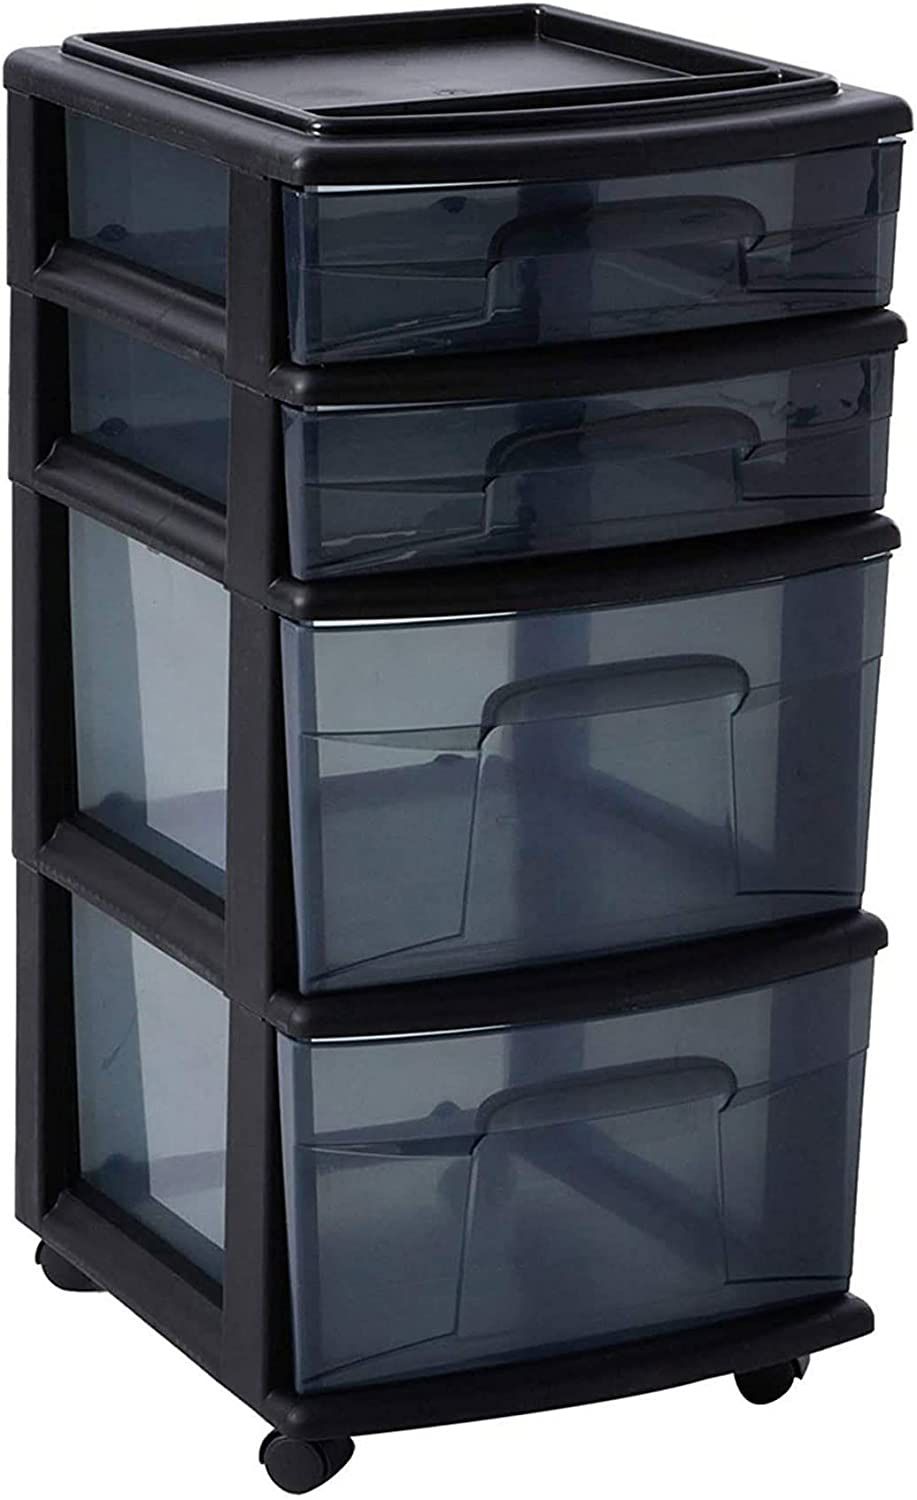 4 Drawer Tall Home Storage Cart with 4 Caster Wheels for Home, Office, Dorm, and Classroom, Black MSRP $69.99